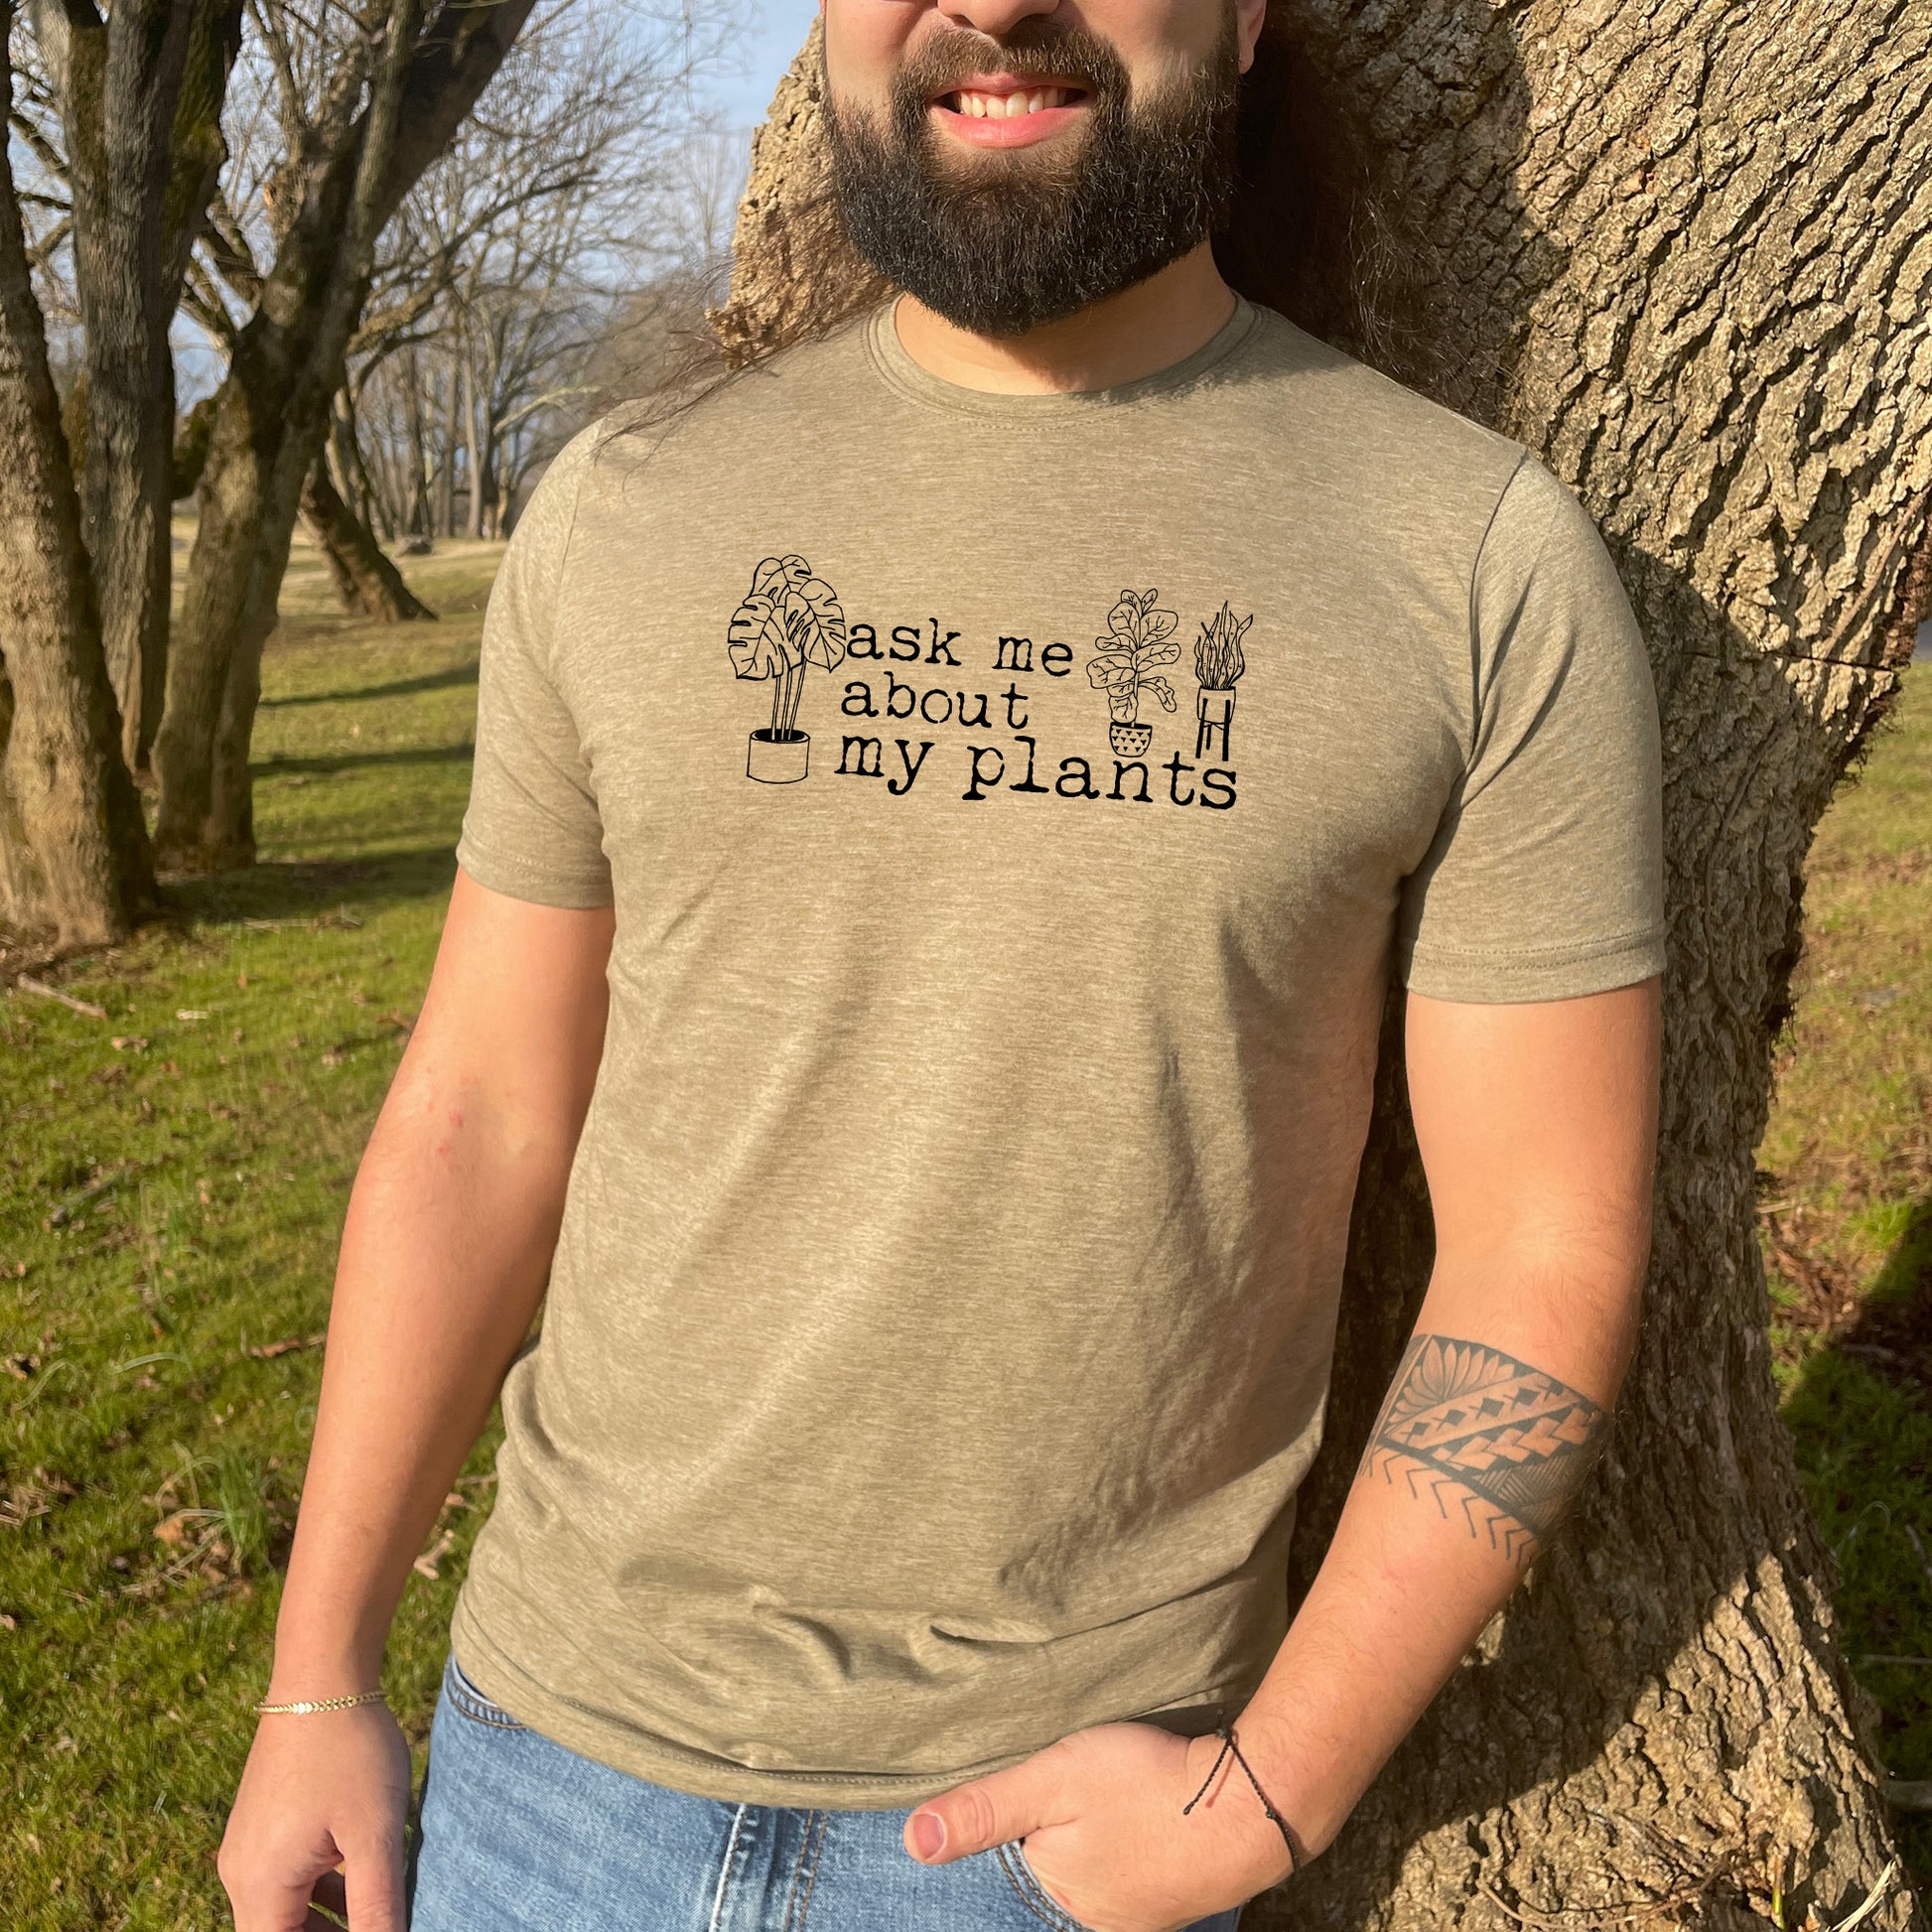 a man with a beard standing next to a tree